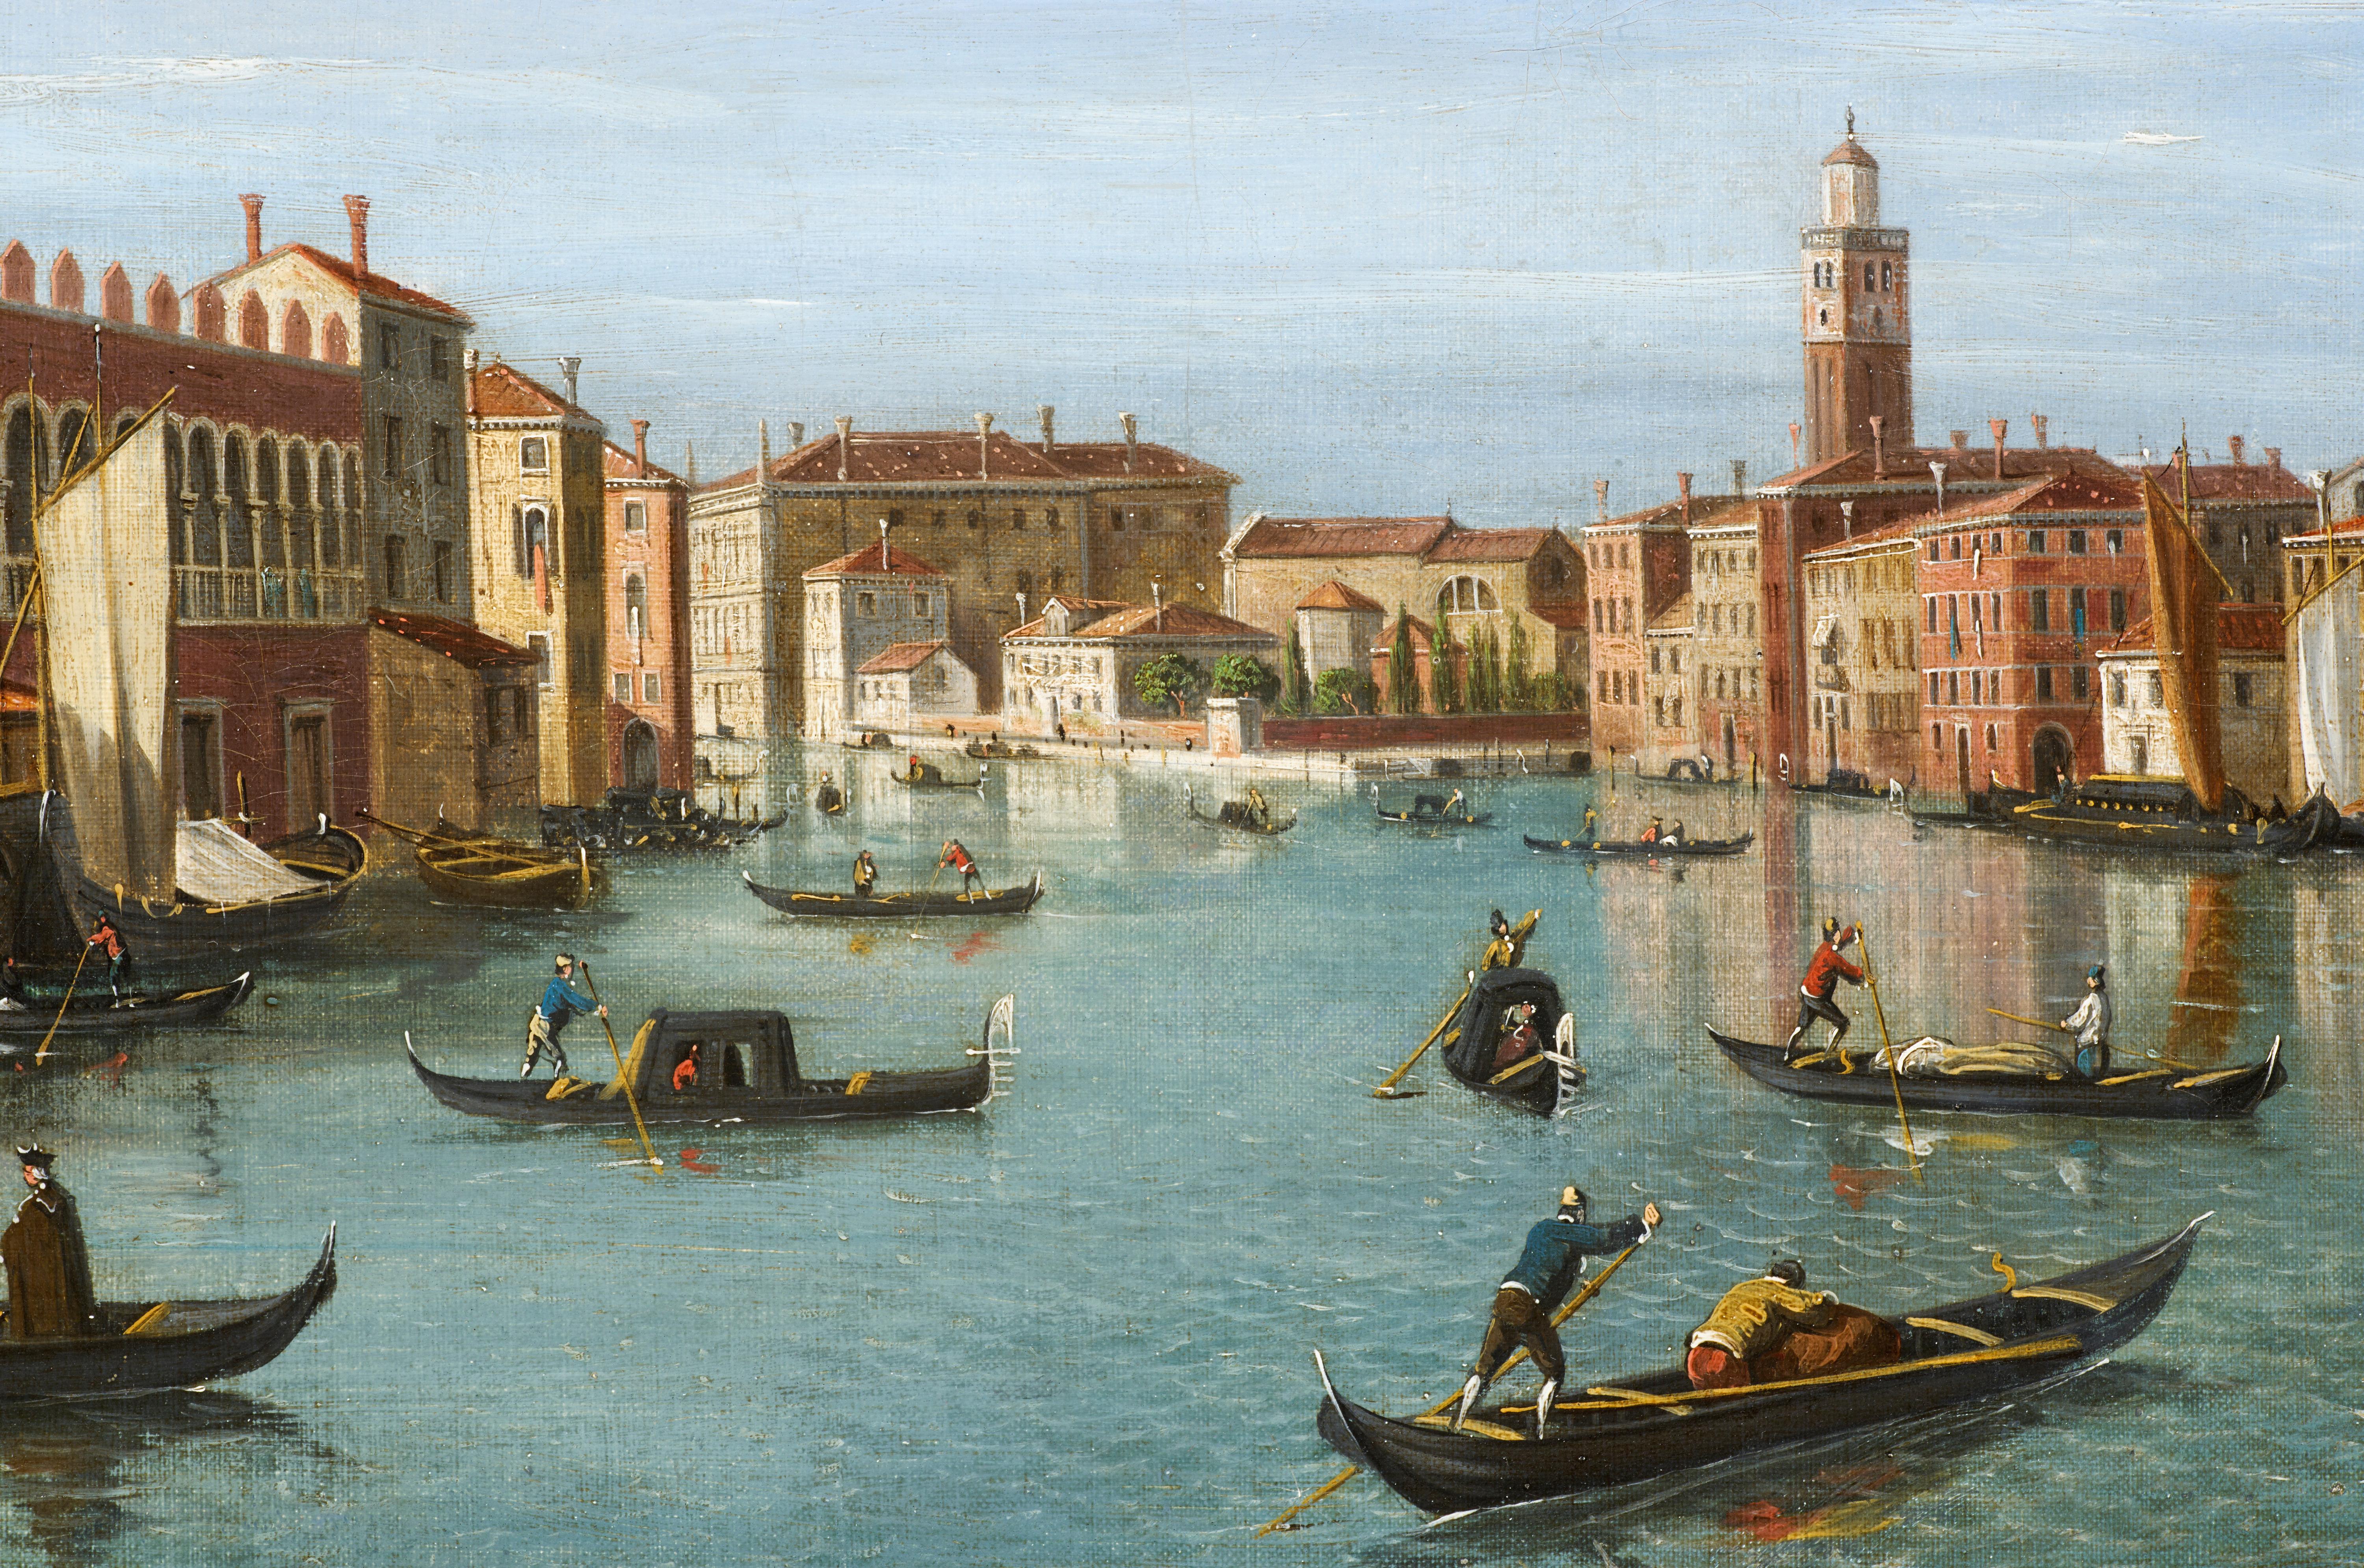 Although we have little bibliographical information on William James, we know that he was trained by Canaletto during the painter's stay in England between 1746 and 1755. Although he may never have been to Venice, William James remained under the